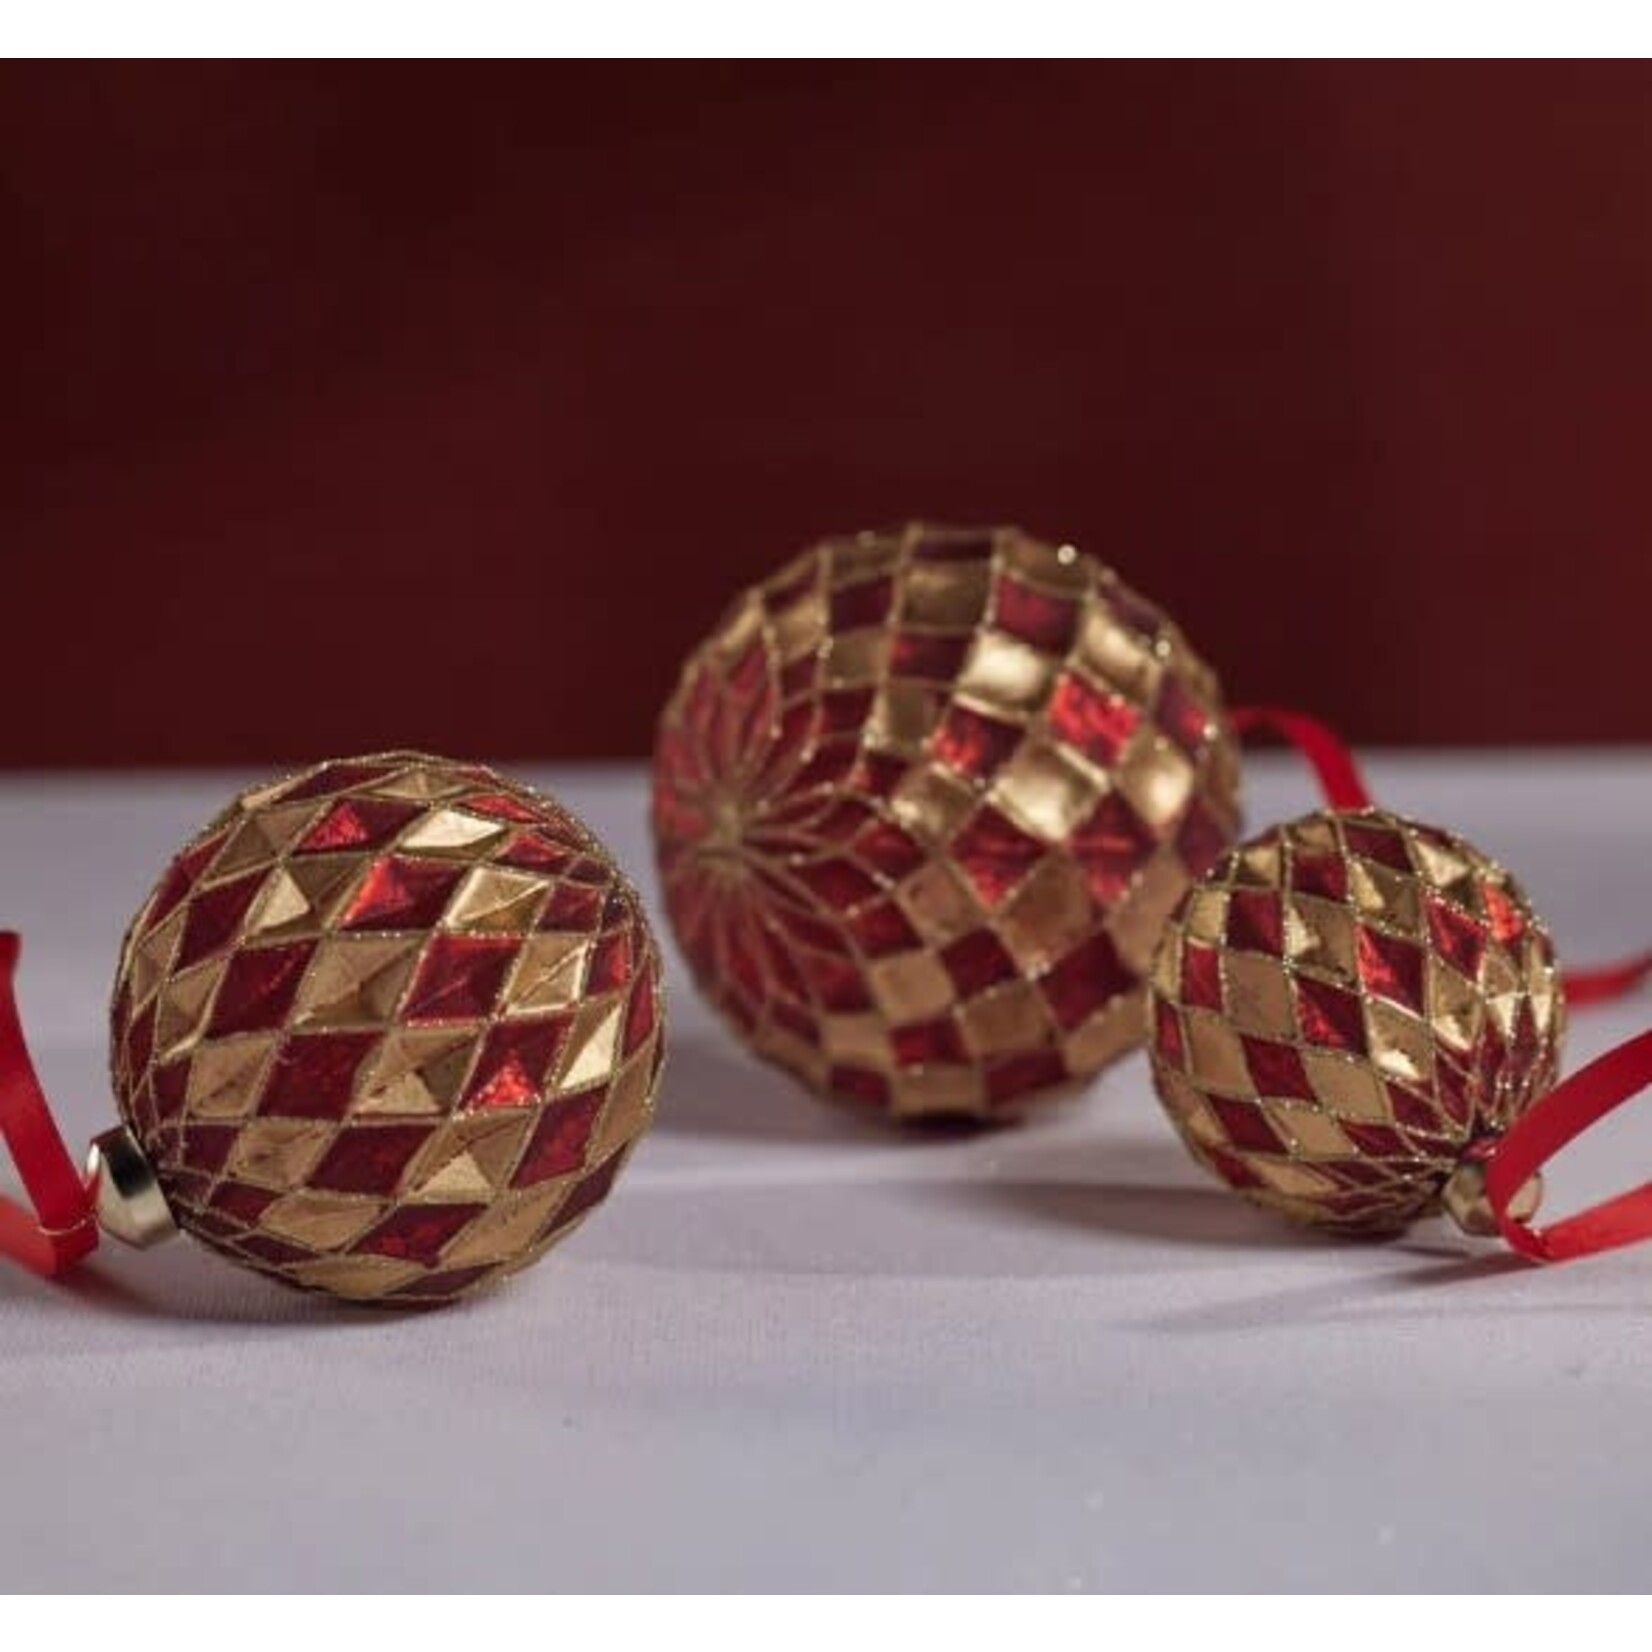 Zodax Harlequin Glass Ball Ornament Red and Gold 4.75 in